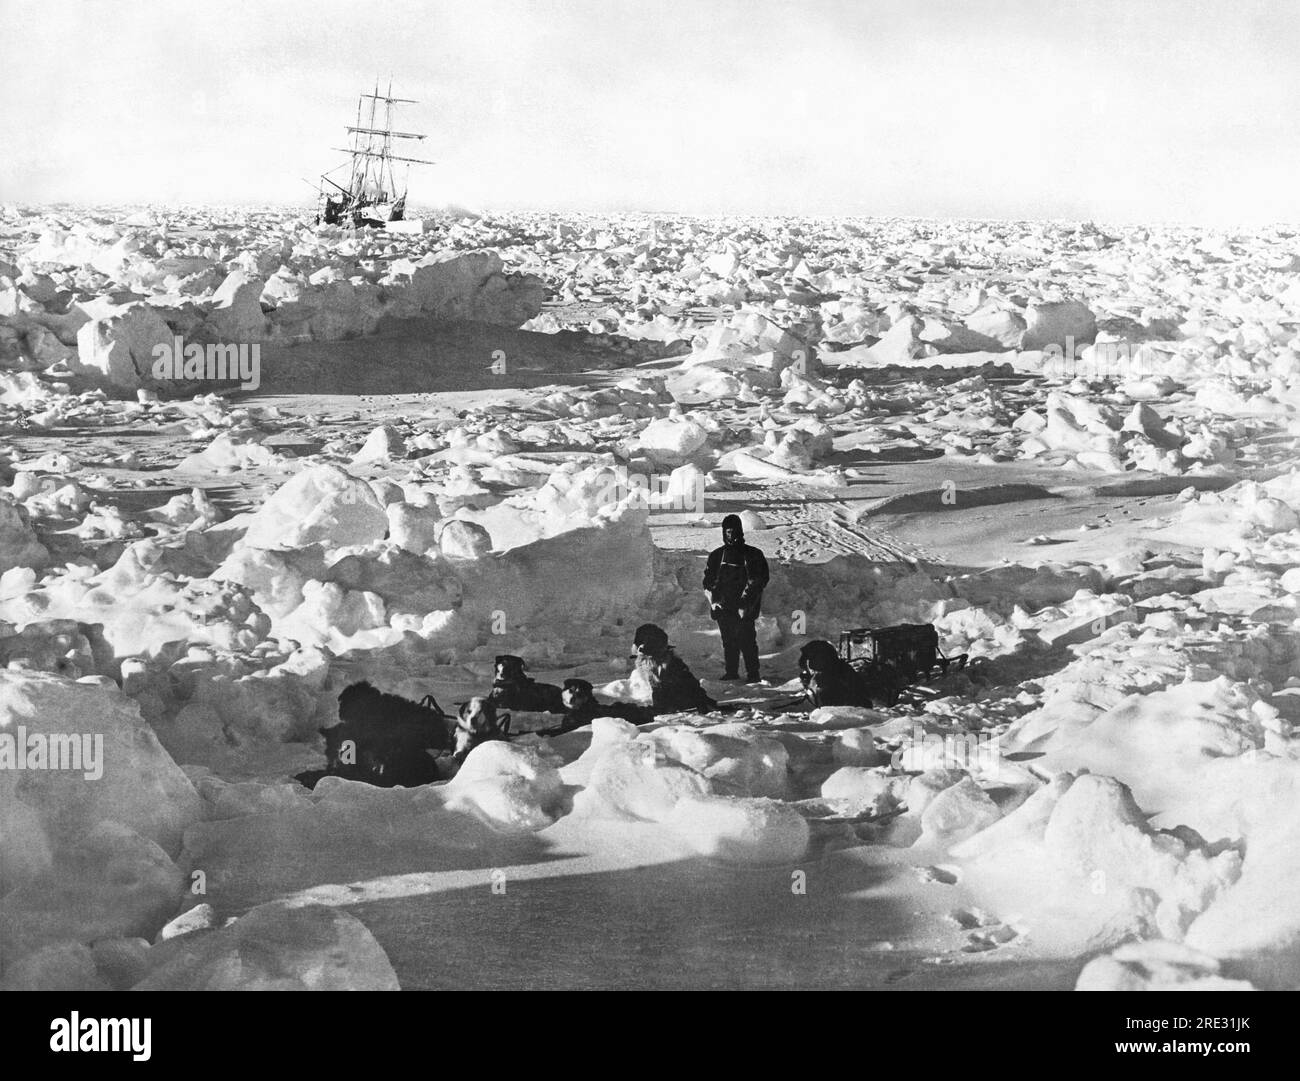 Antarctica:  1915 British explorer Sir Ernest Shackleton's ship, the Endurance, caught in the ice of the Weddell Sea, where it eventually sank. In the foreground is one of the expedition members out with a dog sled team on a food foraging expedition. Stock Photo